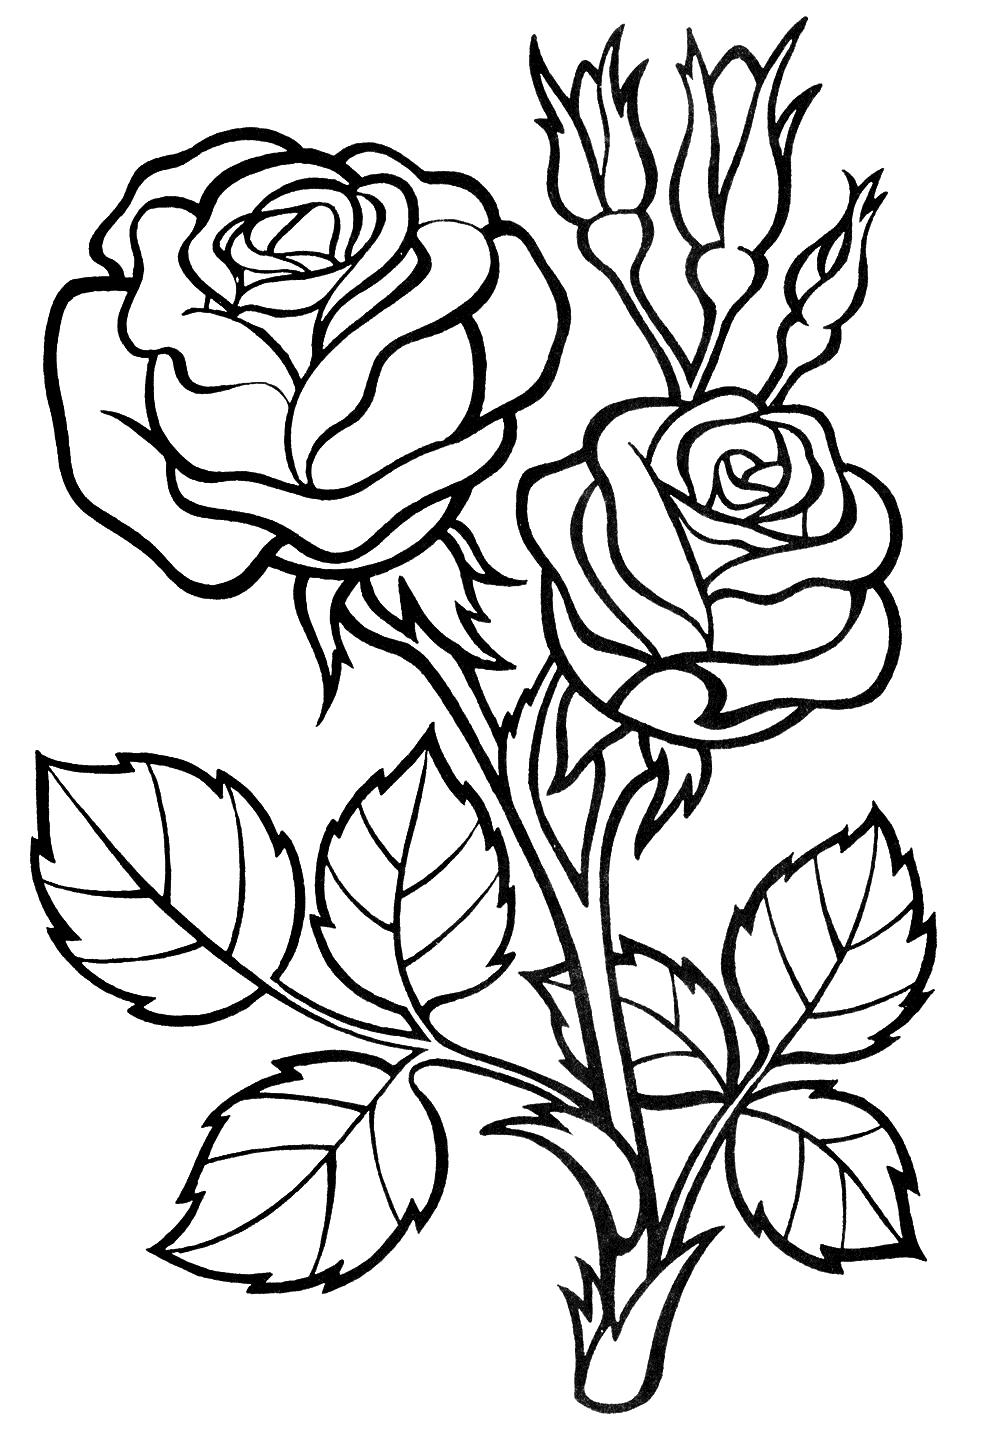 rose coloring sheets rose flower coloring page pictures coloring coloring rose sheets 